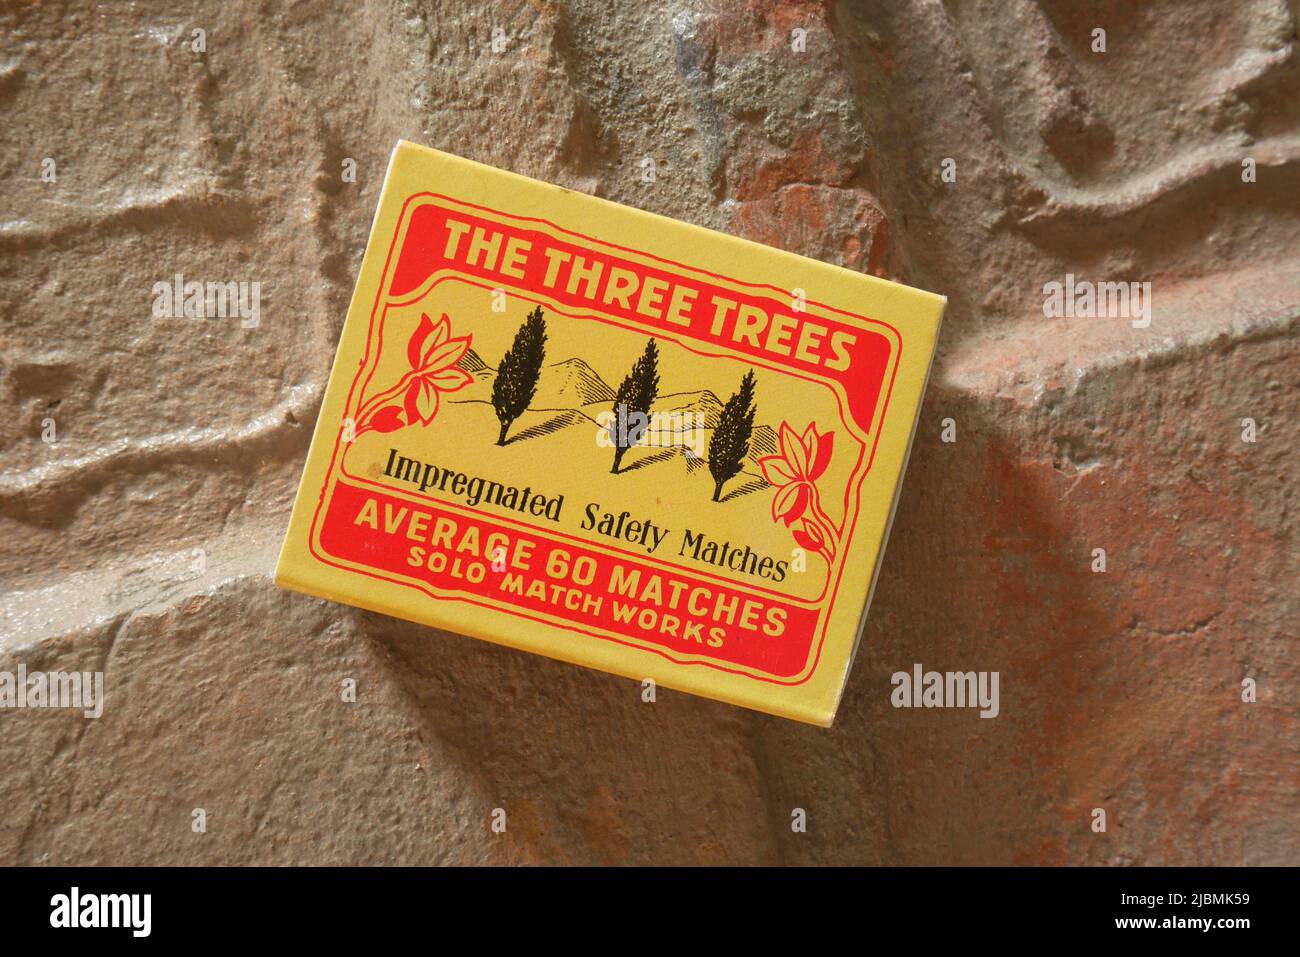 Box of Czech safety matches, brand the Three Trees Stock Photo